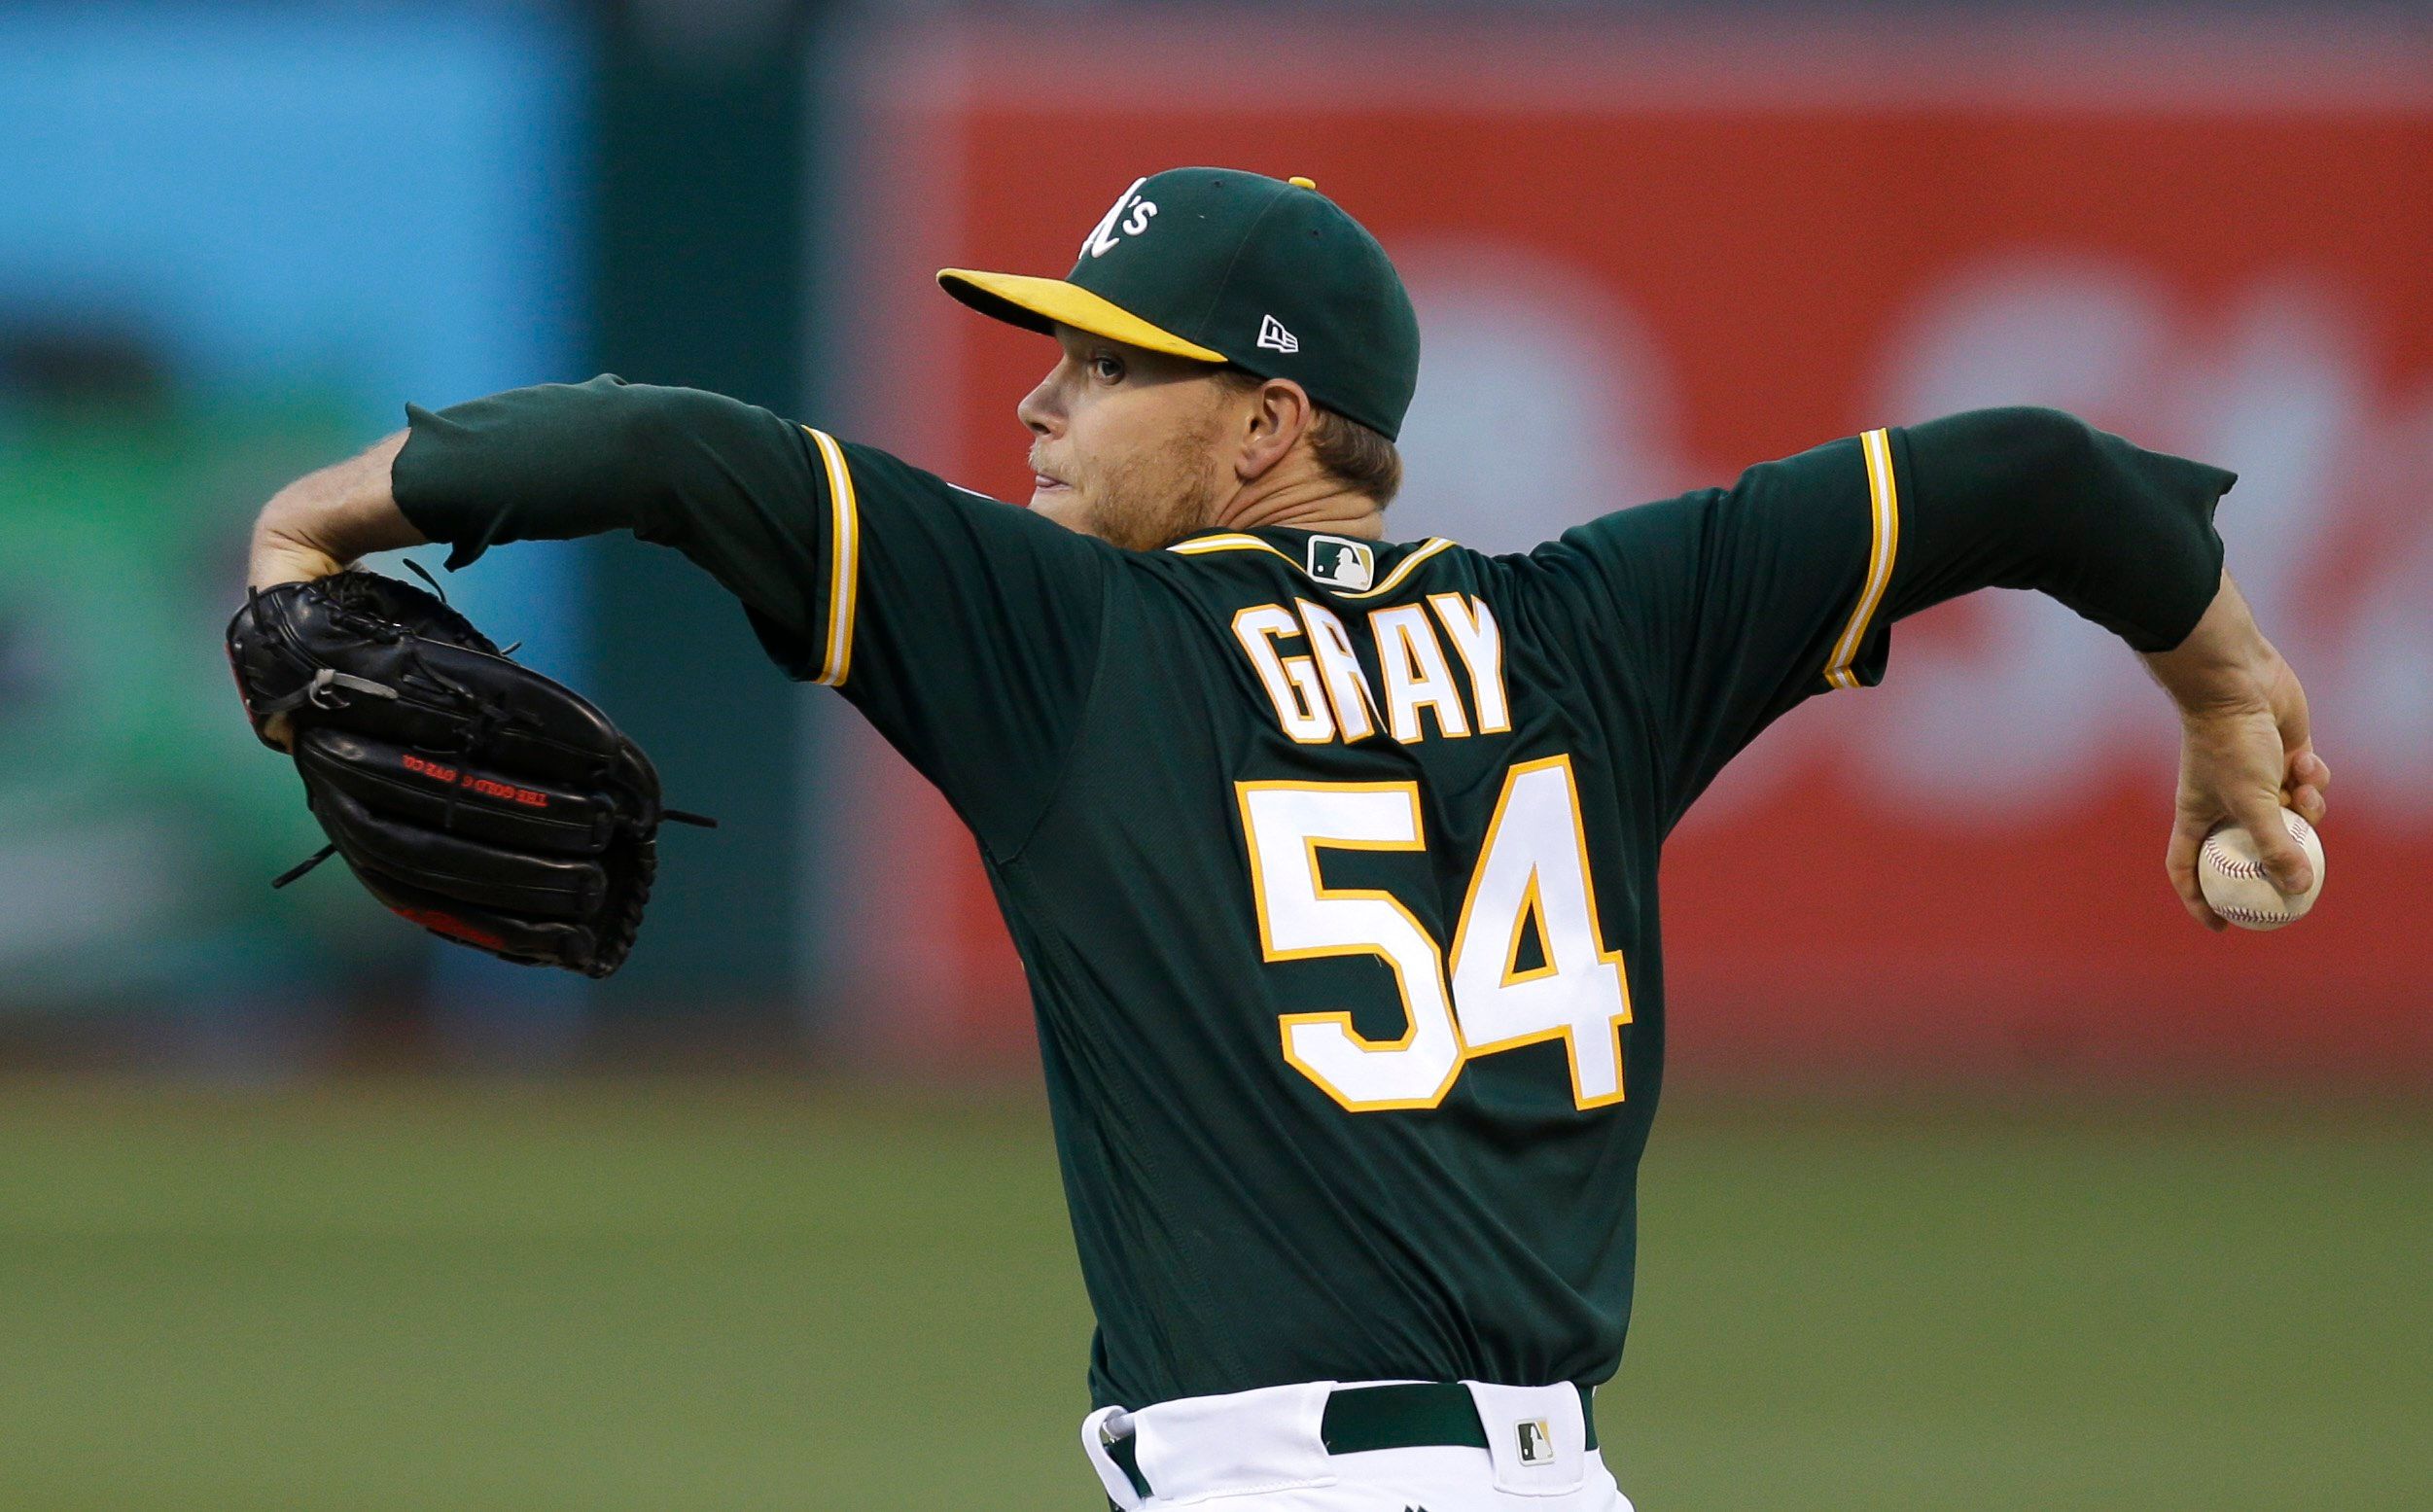 Report: Indians Interested in Sonny Gray